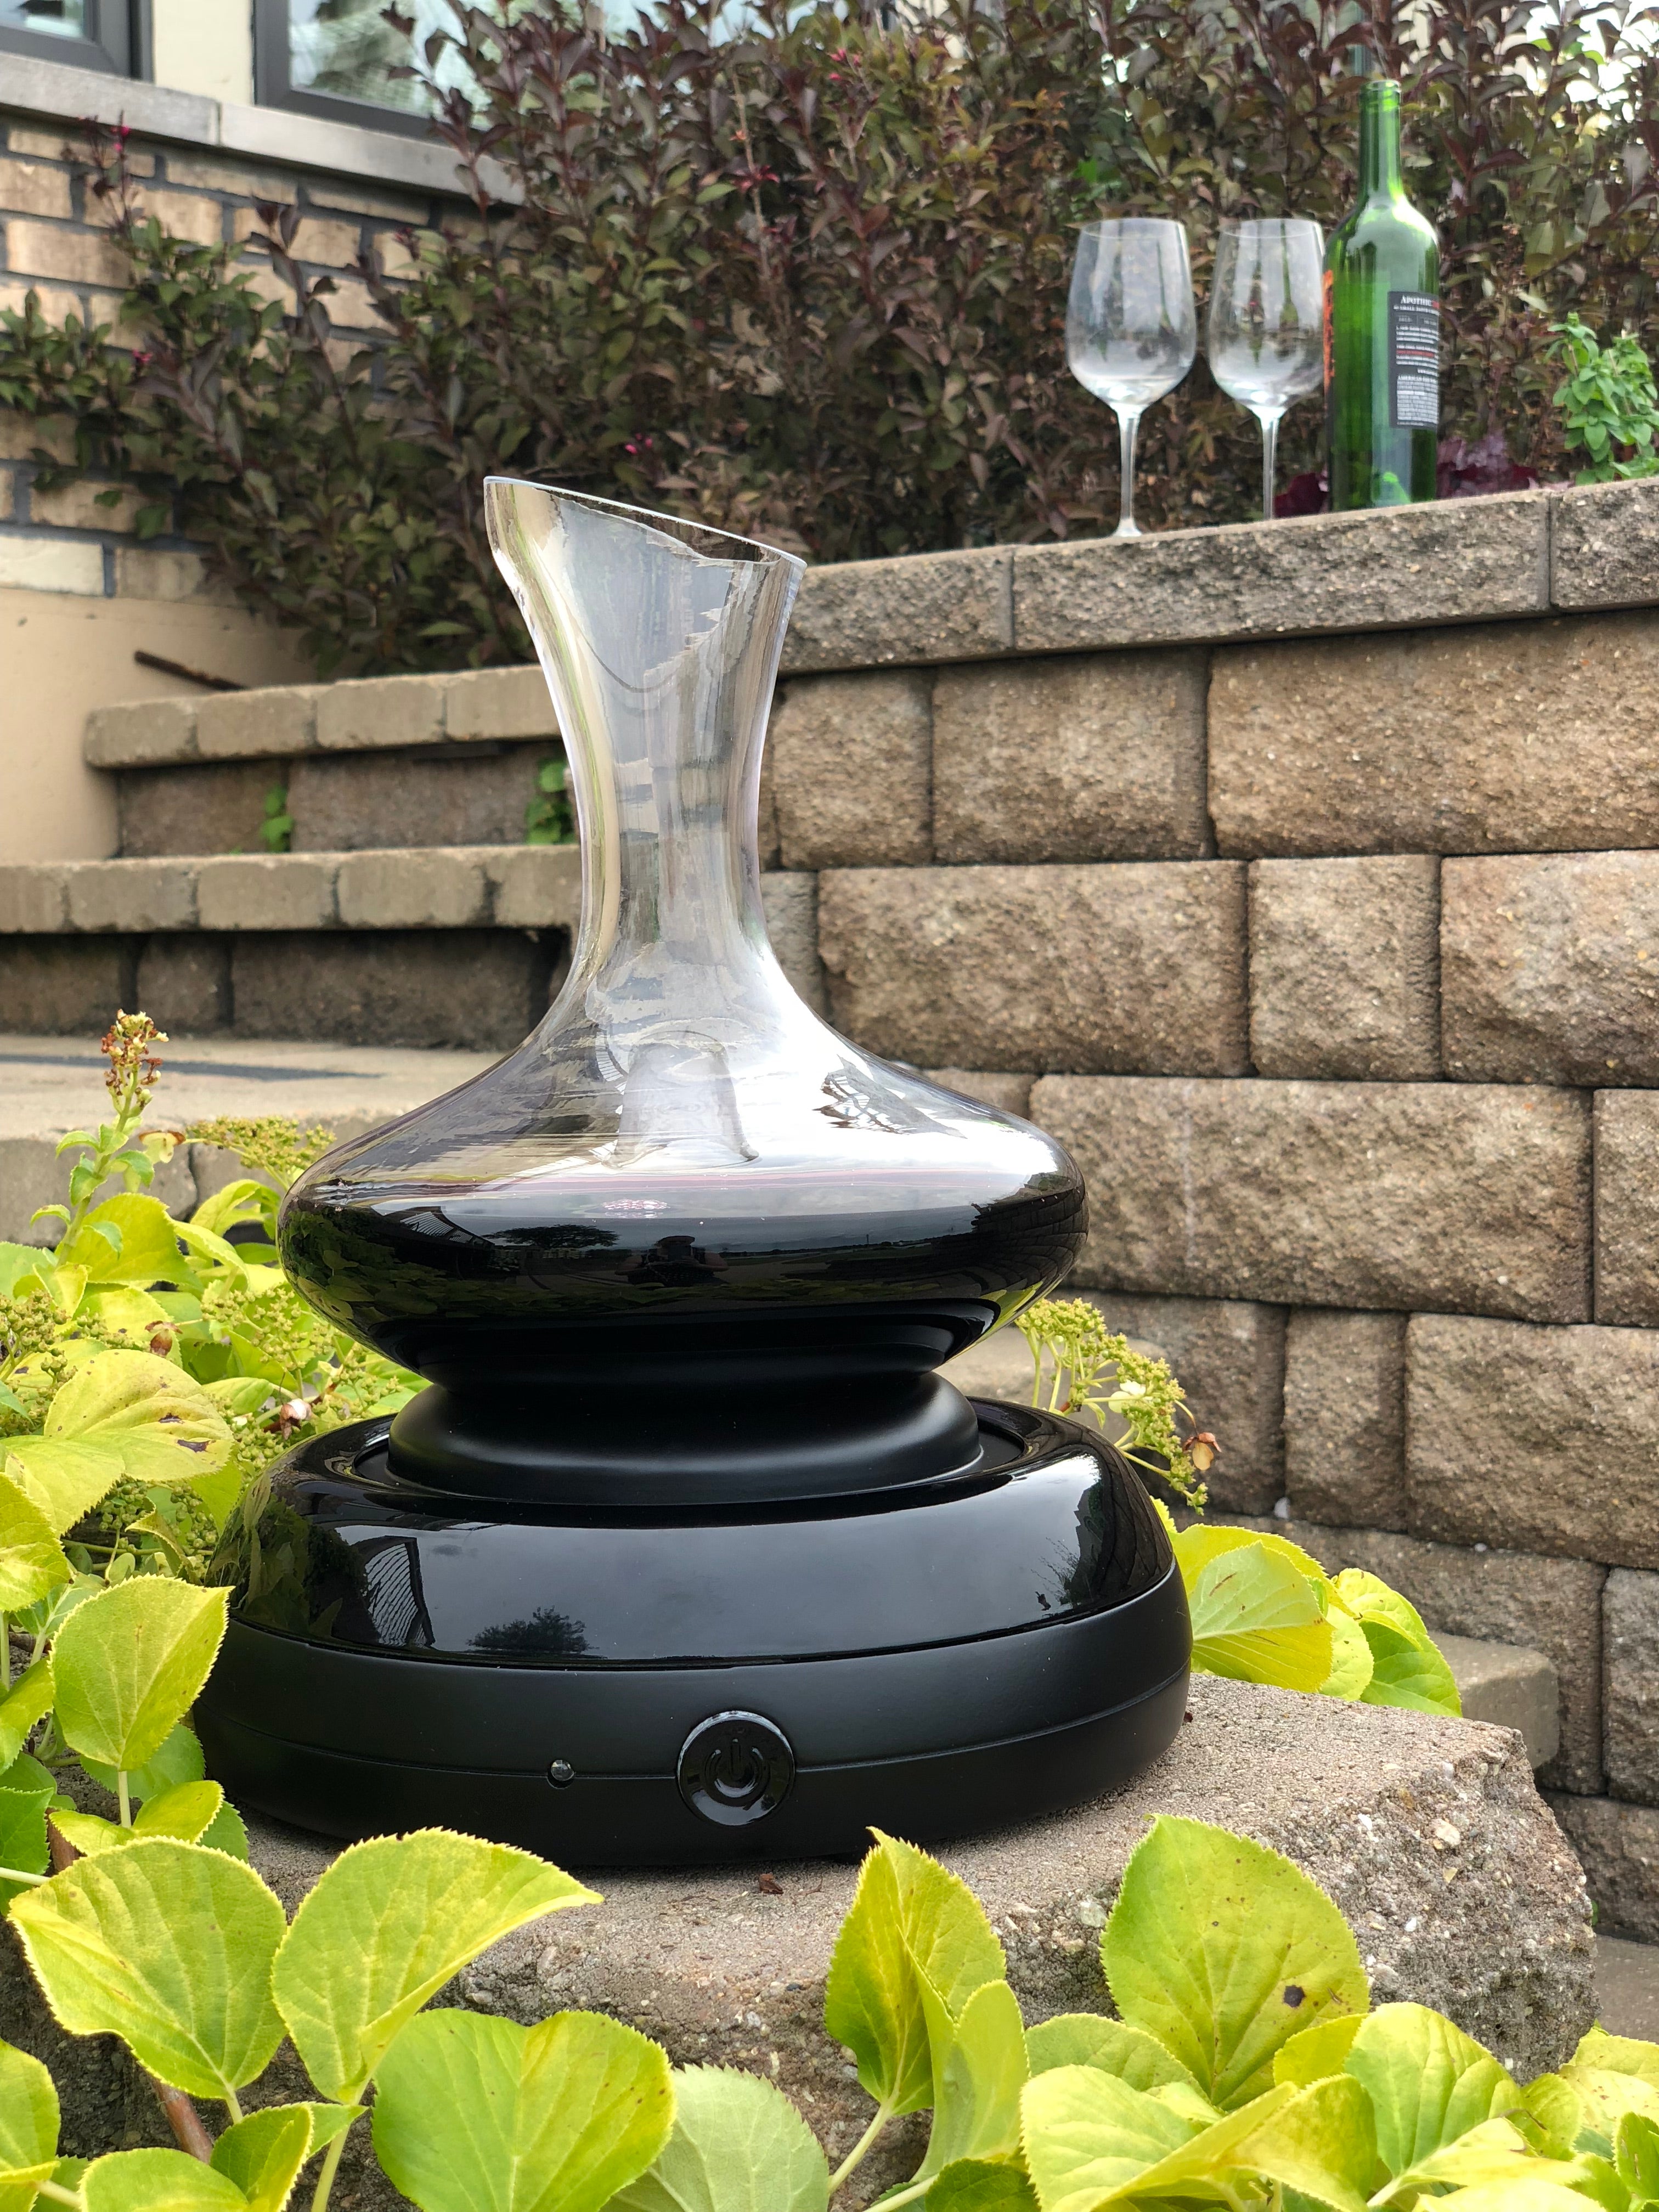 Aerisi Wine Aerator and Decanter with red wine sitting on patio sone stairs surrounded by lush green vines with wine bottle and 2 wine glasses in background